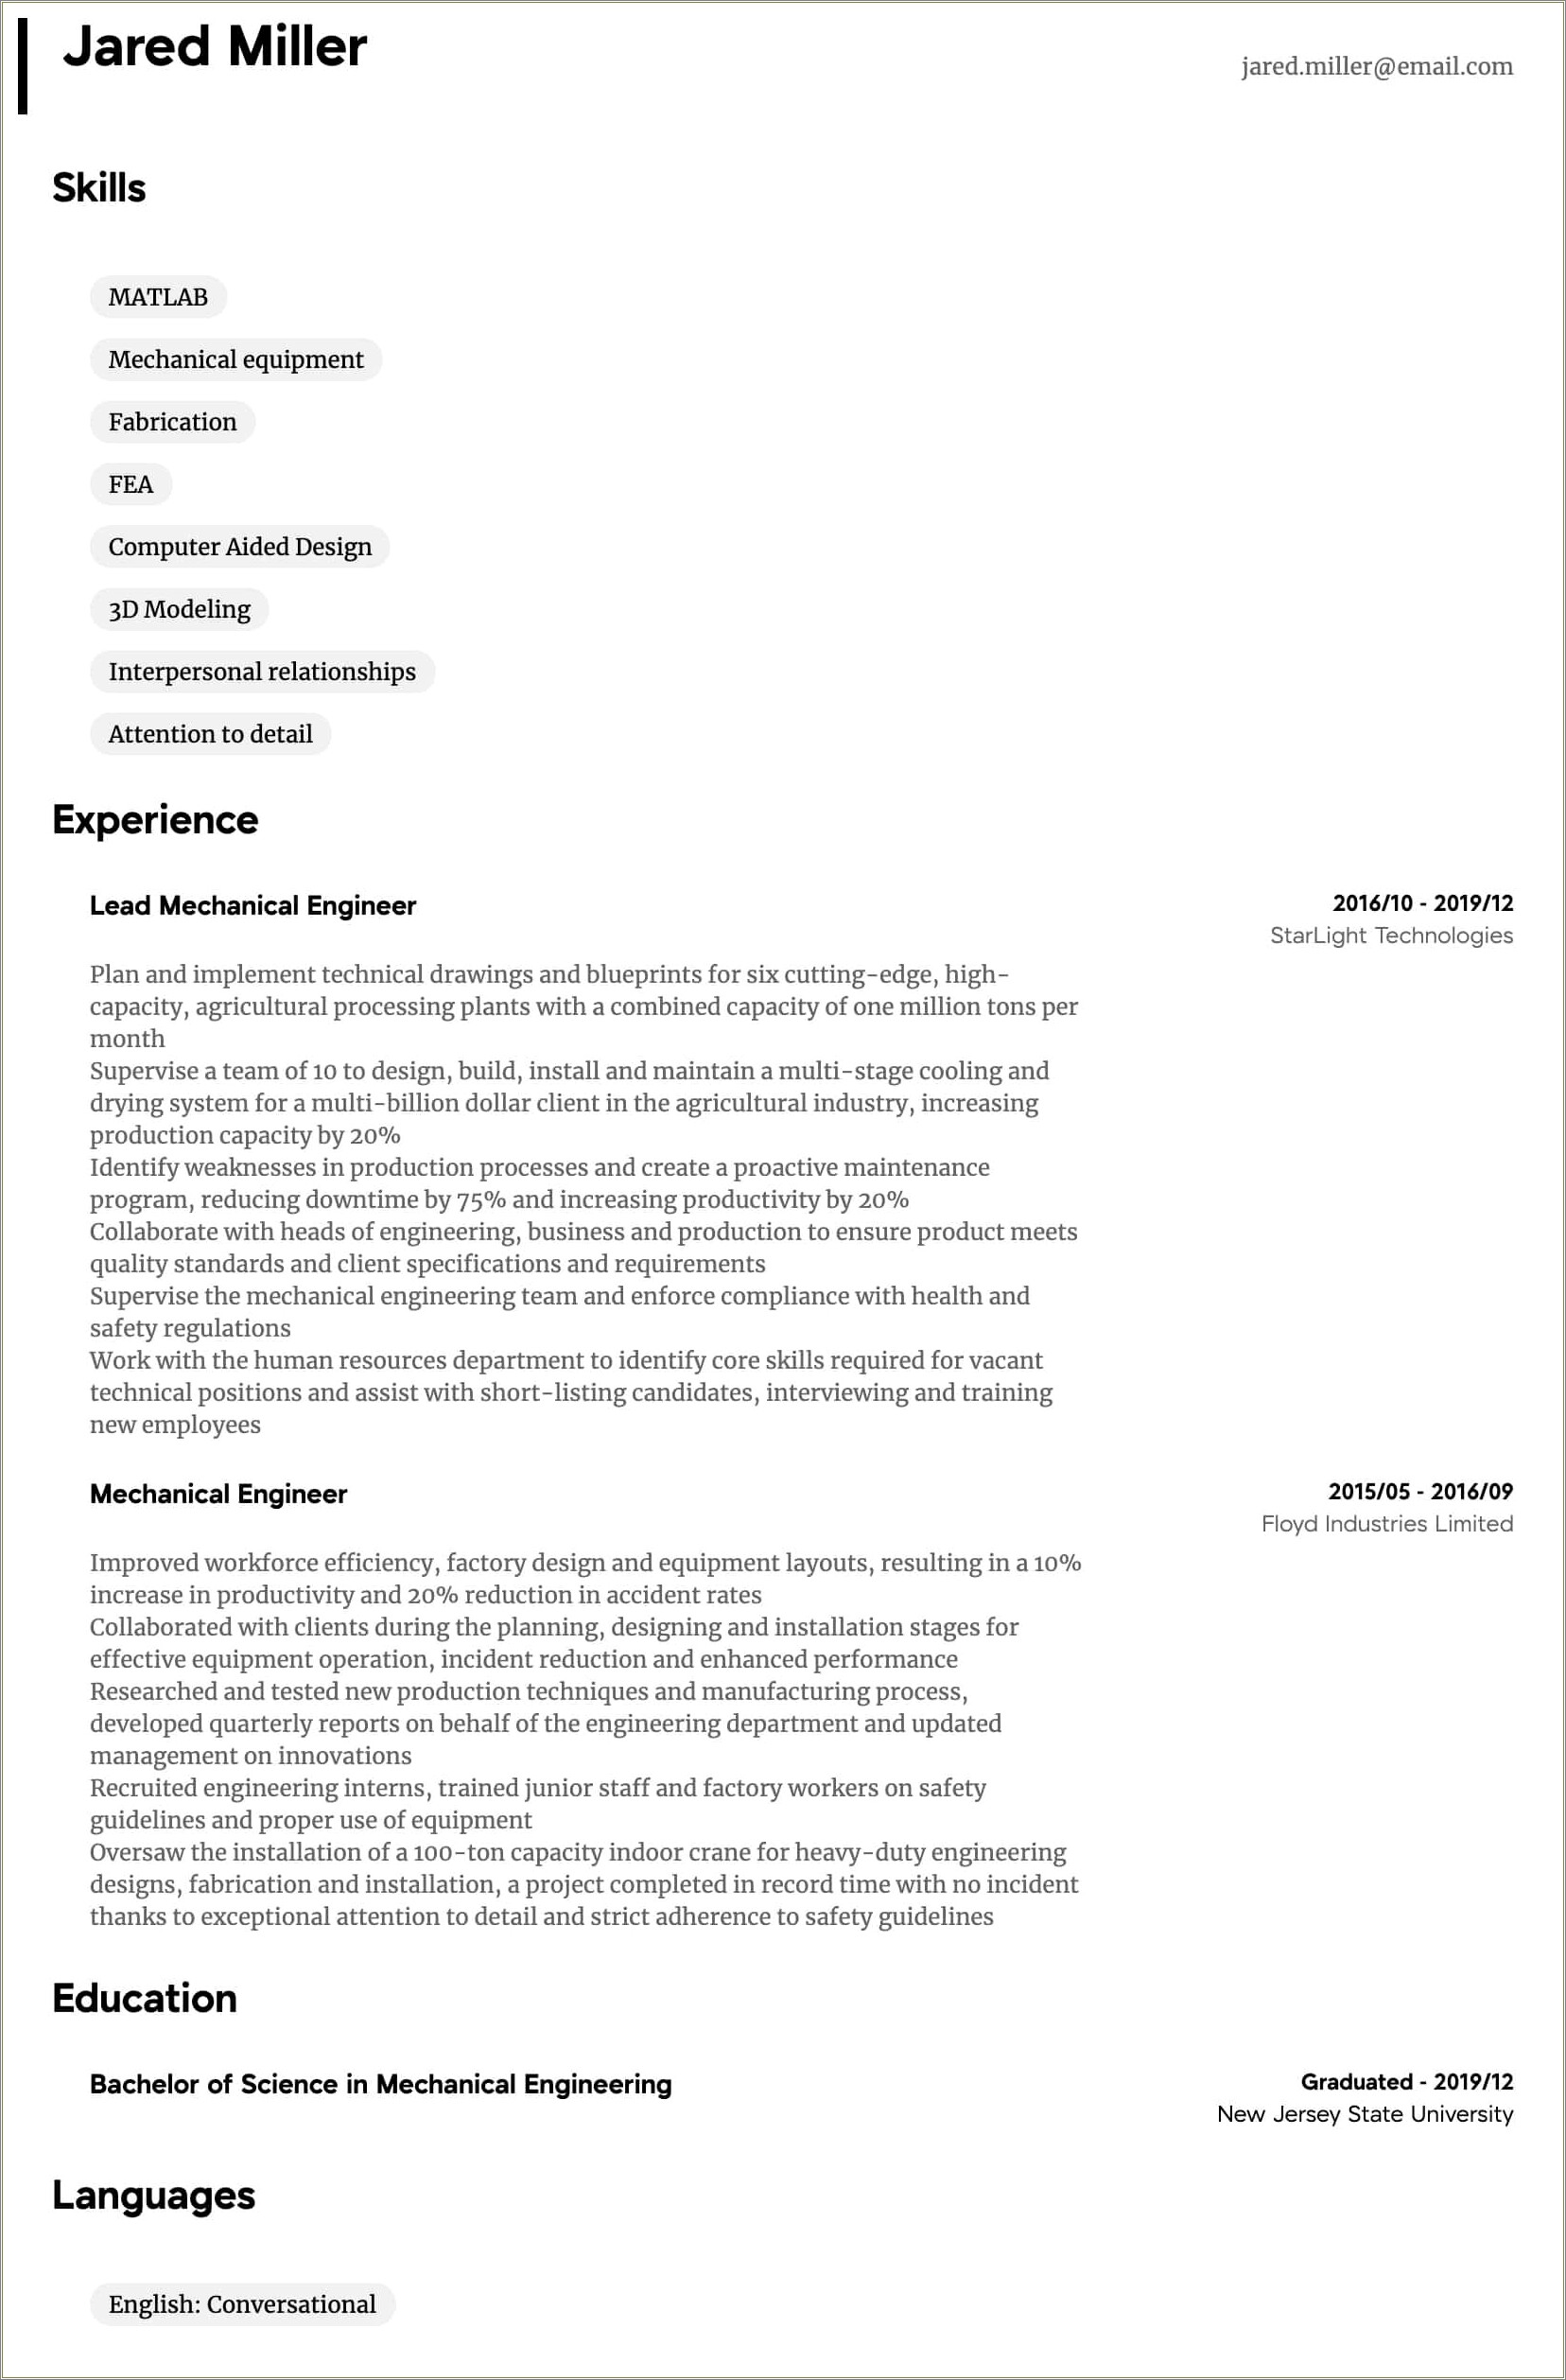 Resume Sample For Candidate With Limited English